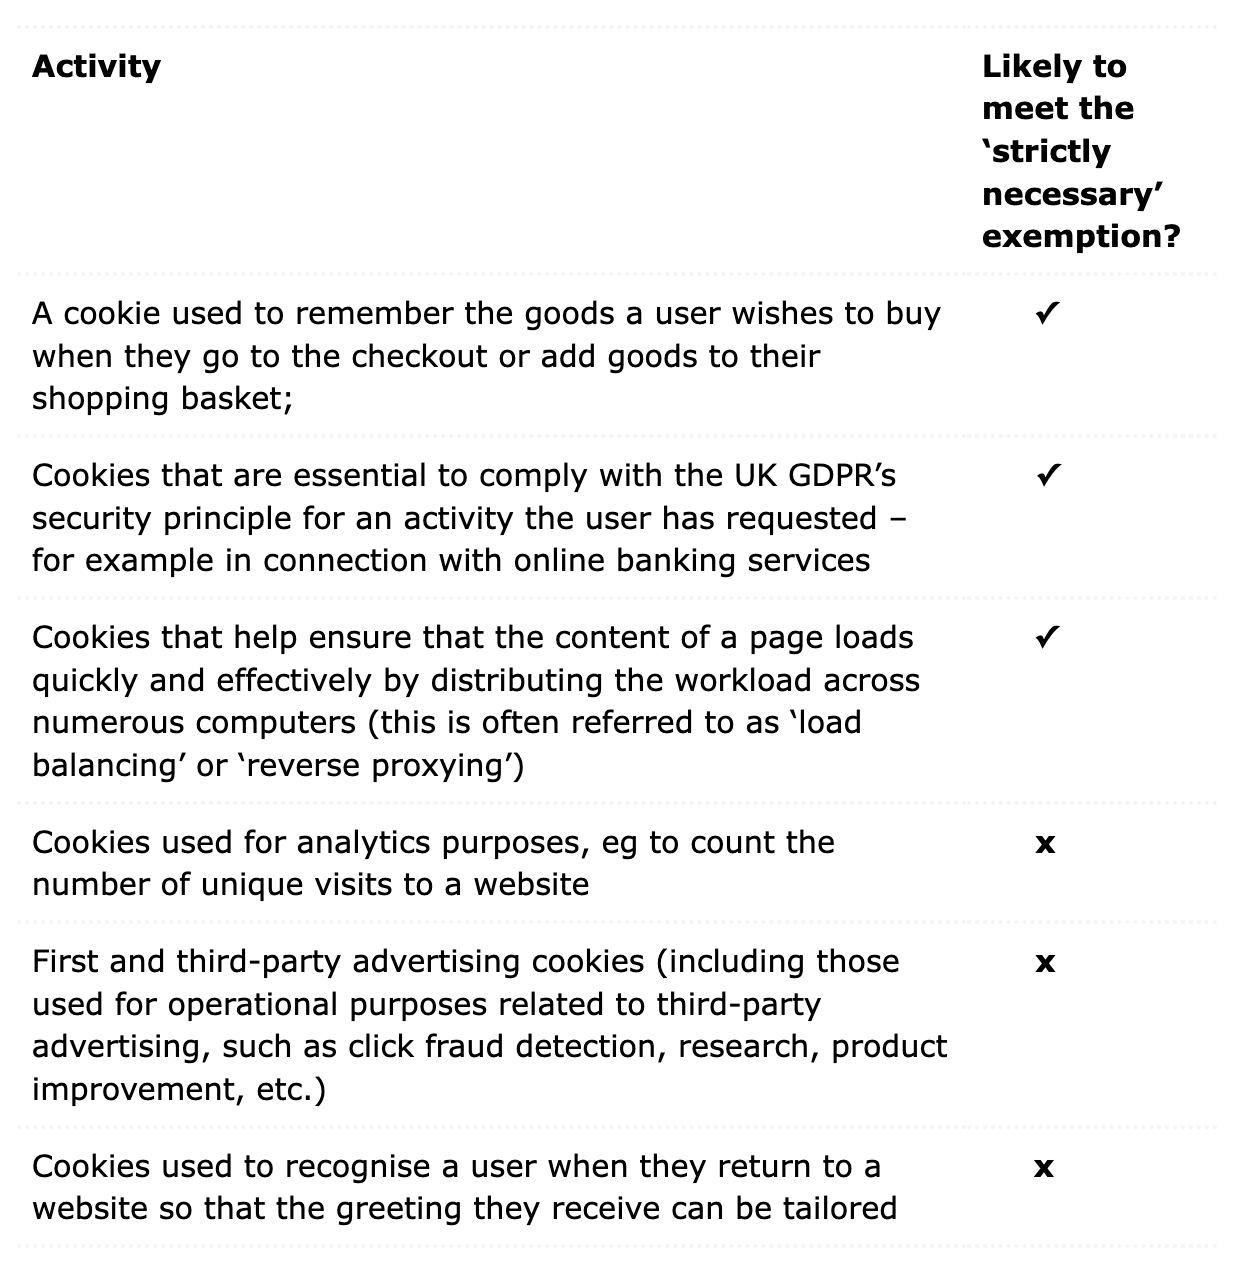 ICO guidelines to exemptions of strictly necessary cookies.